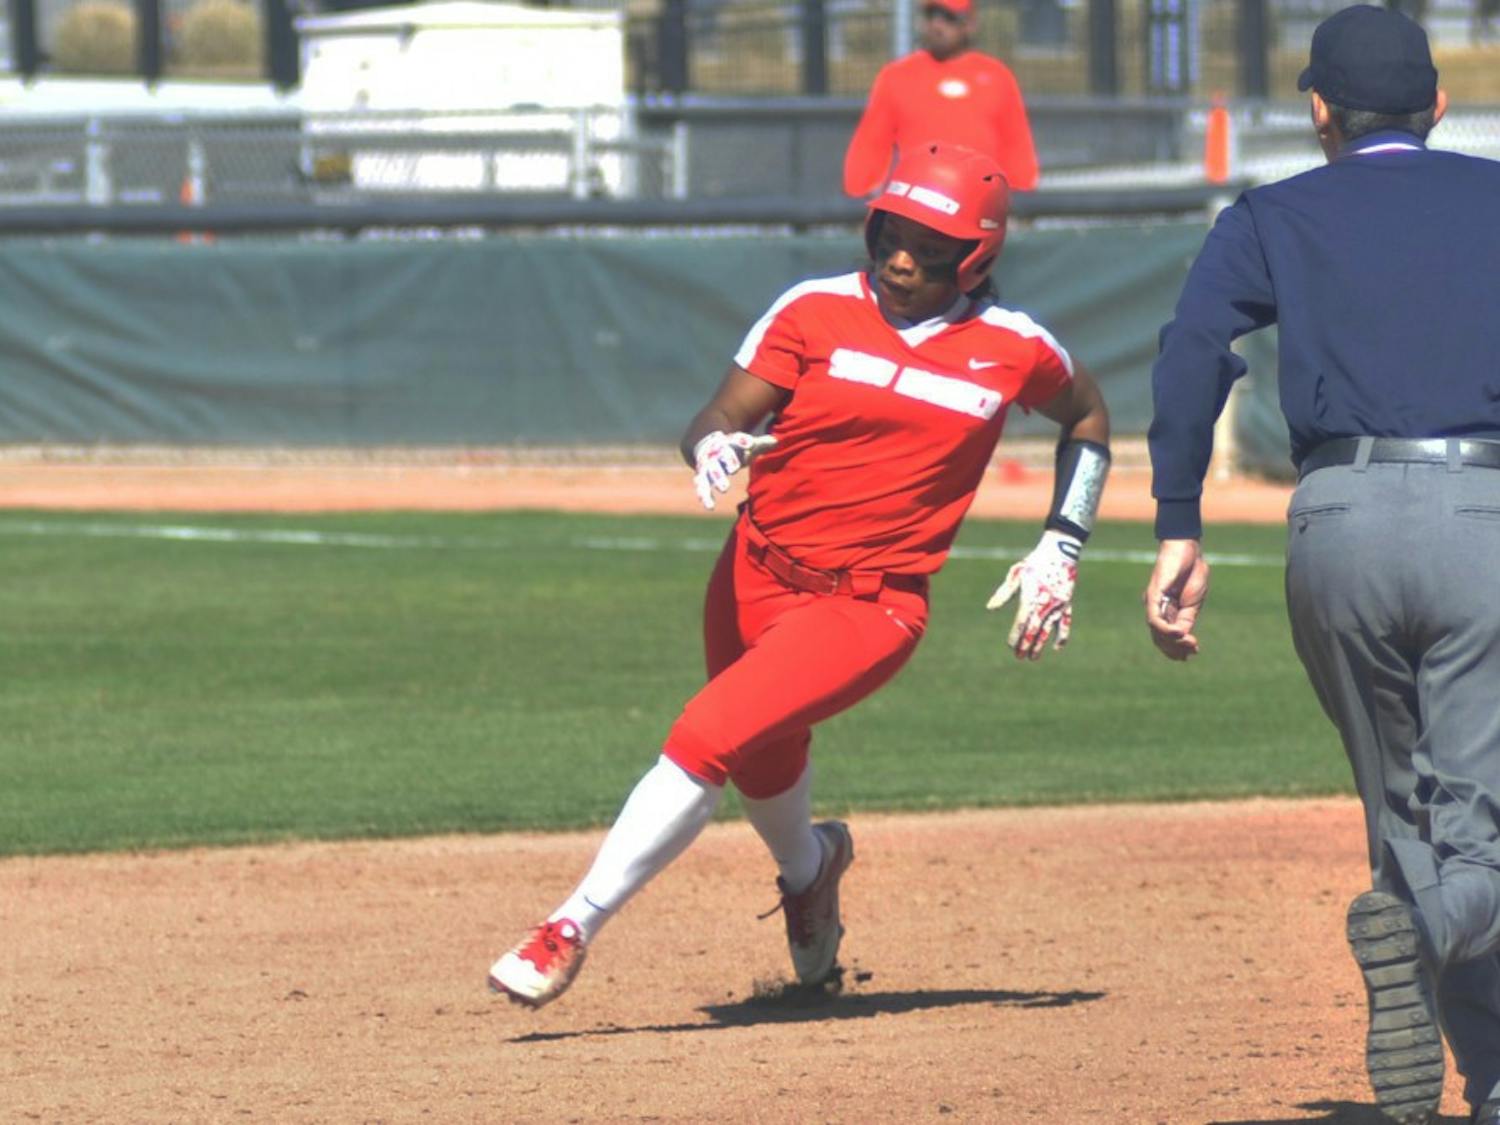 Senior Mariah Rimmer rounds second base during a game against Northern Colorado at the Lobo Softball Field. The Lobos lost to Cal State Fullerton 2-0.